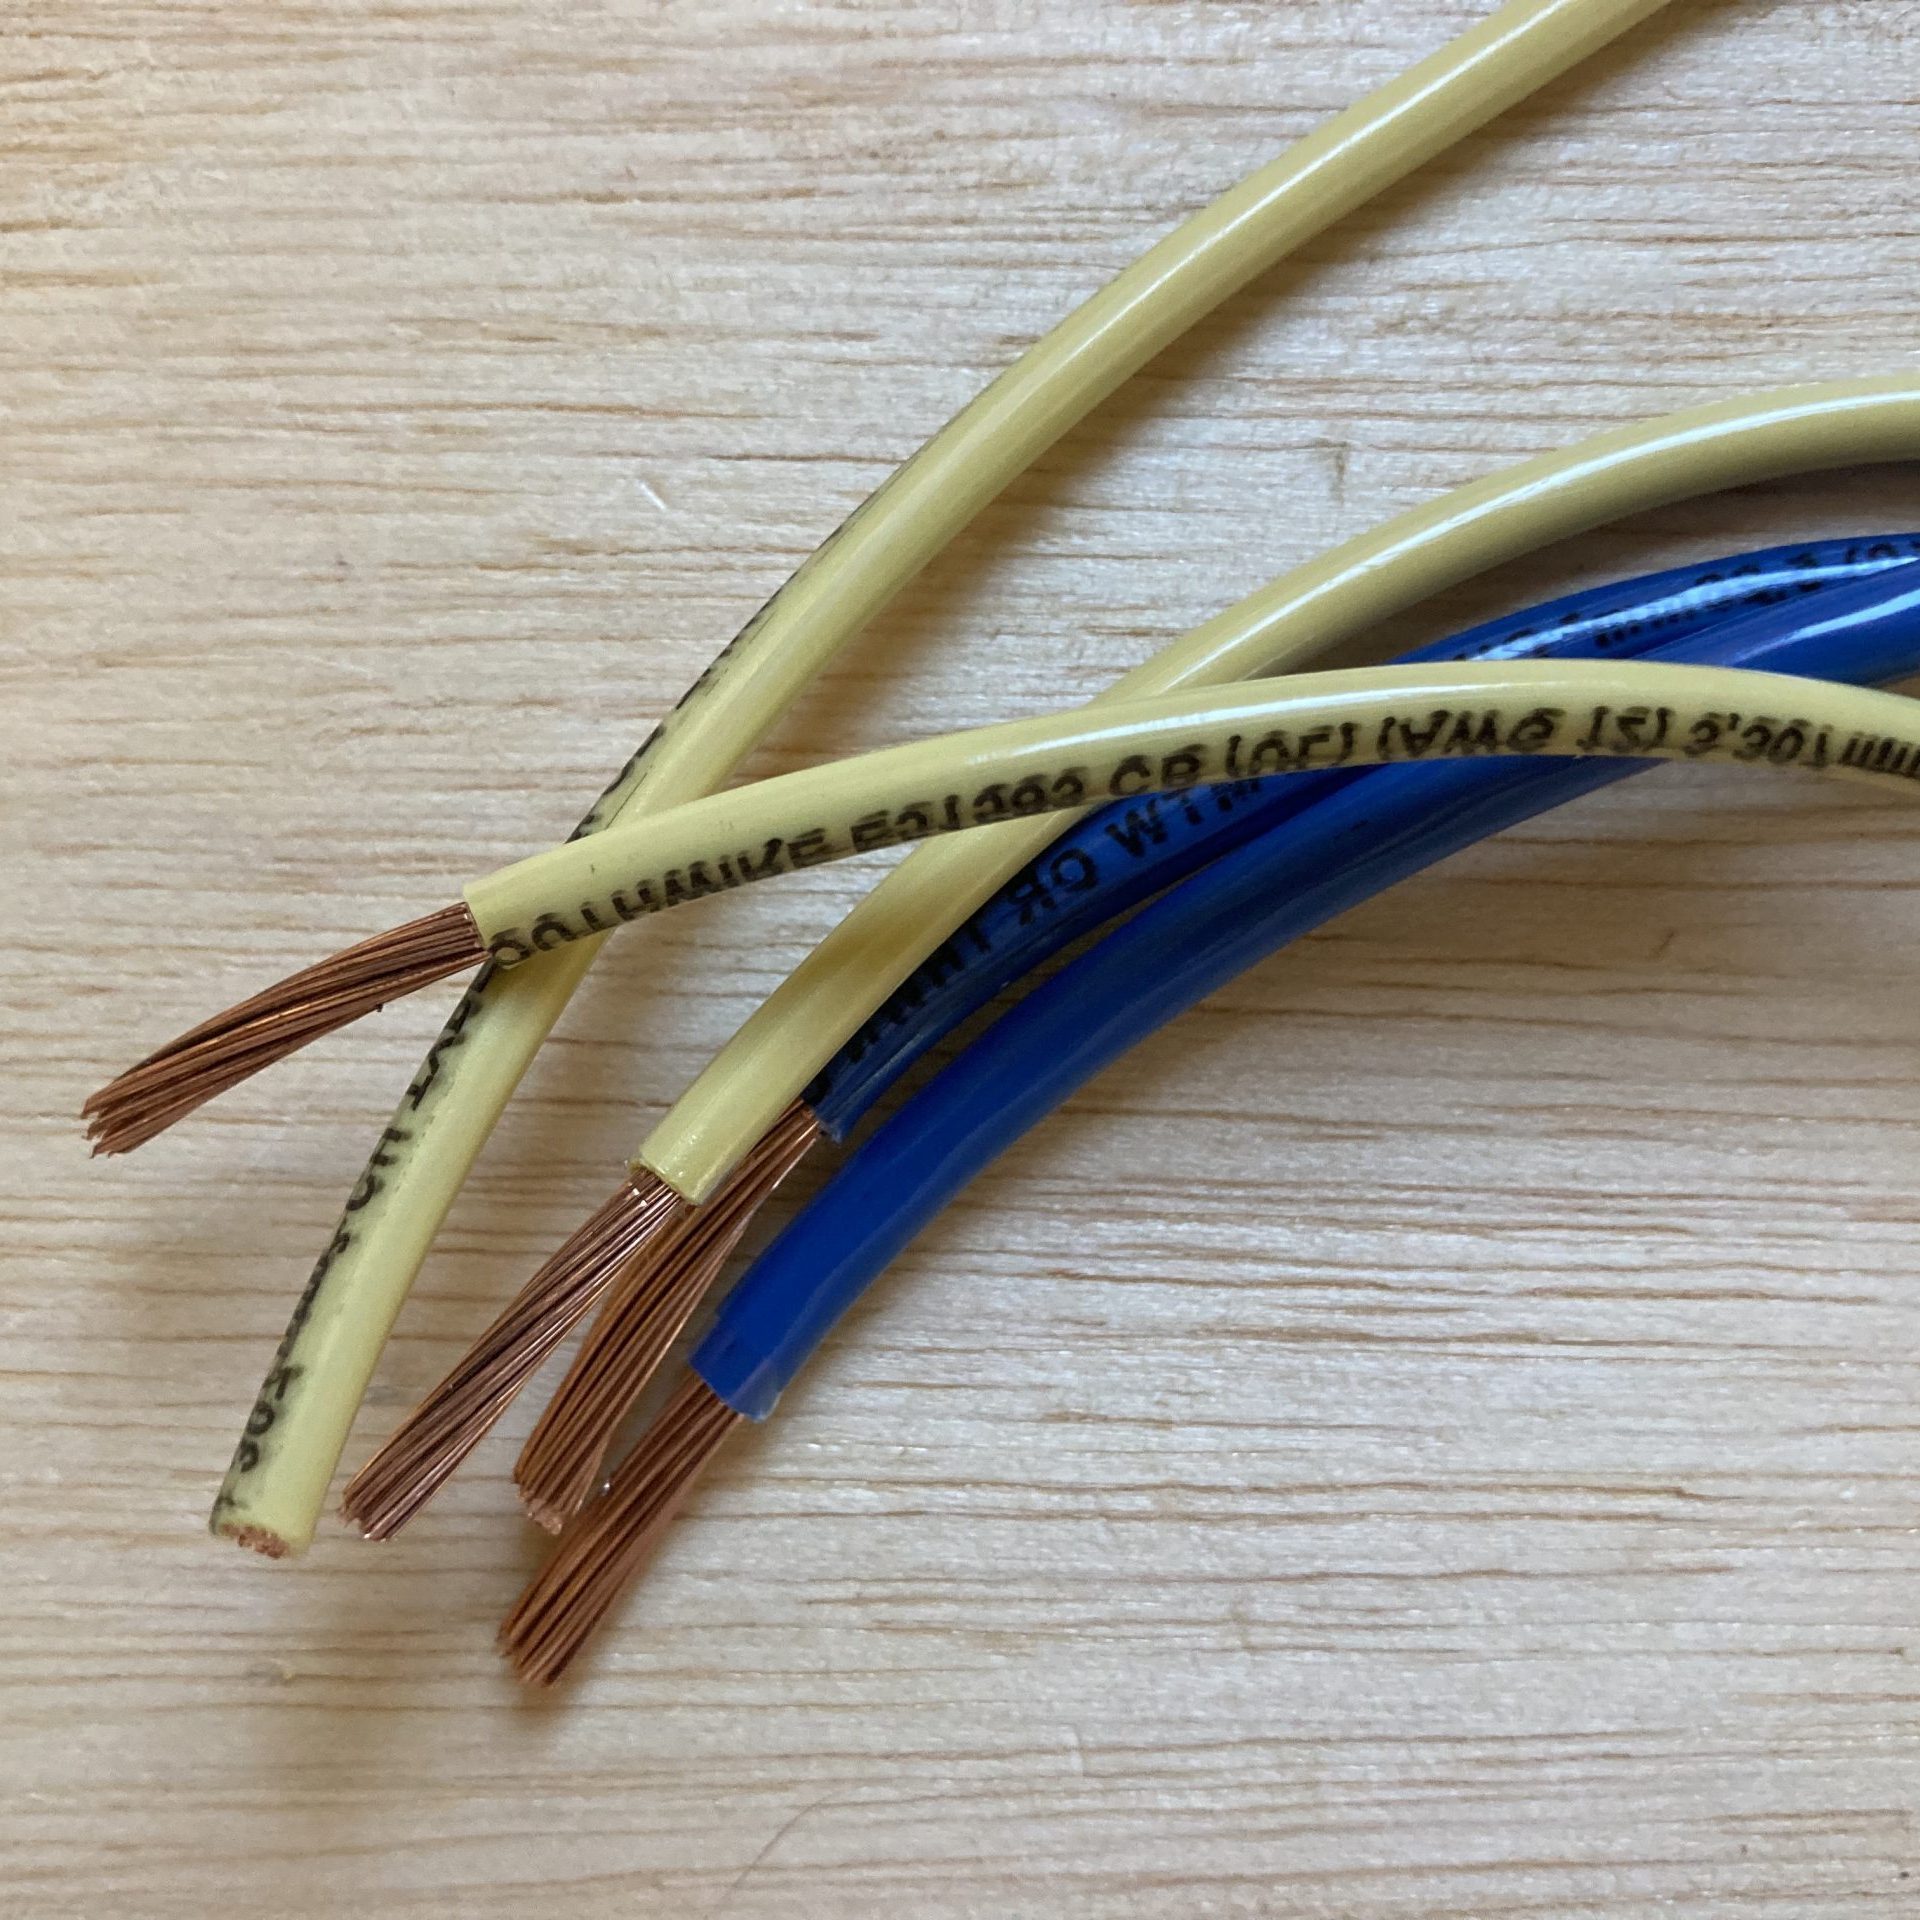 UNDERSTANDING THE COLOR CODES ON ELECTRICAL WIRES — RSB Electrical